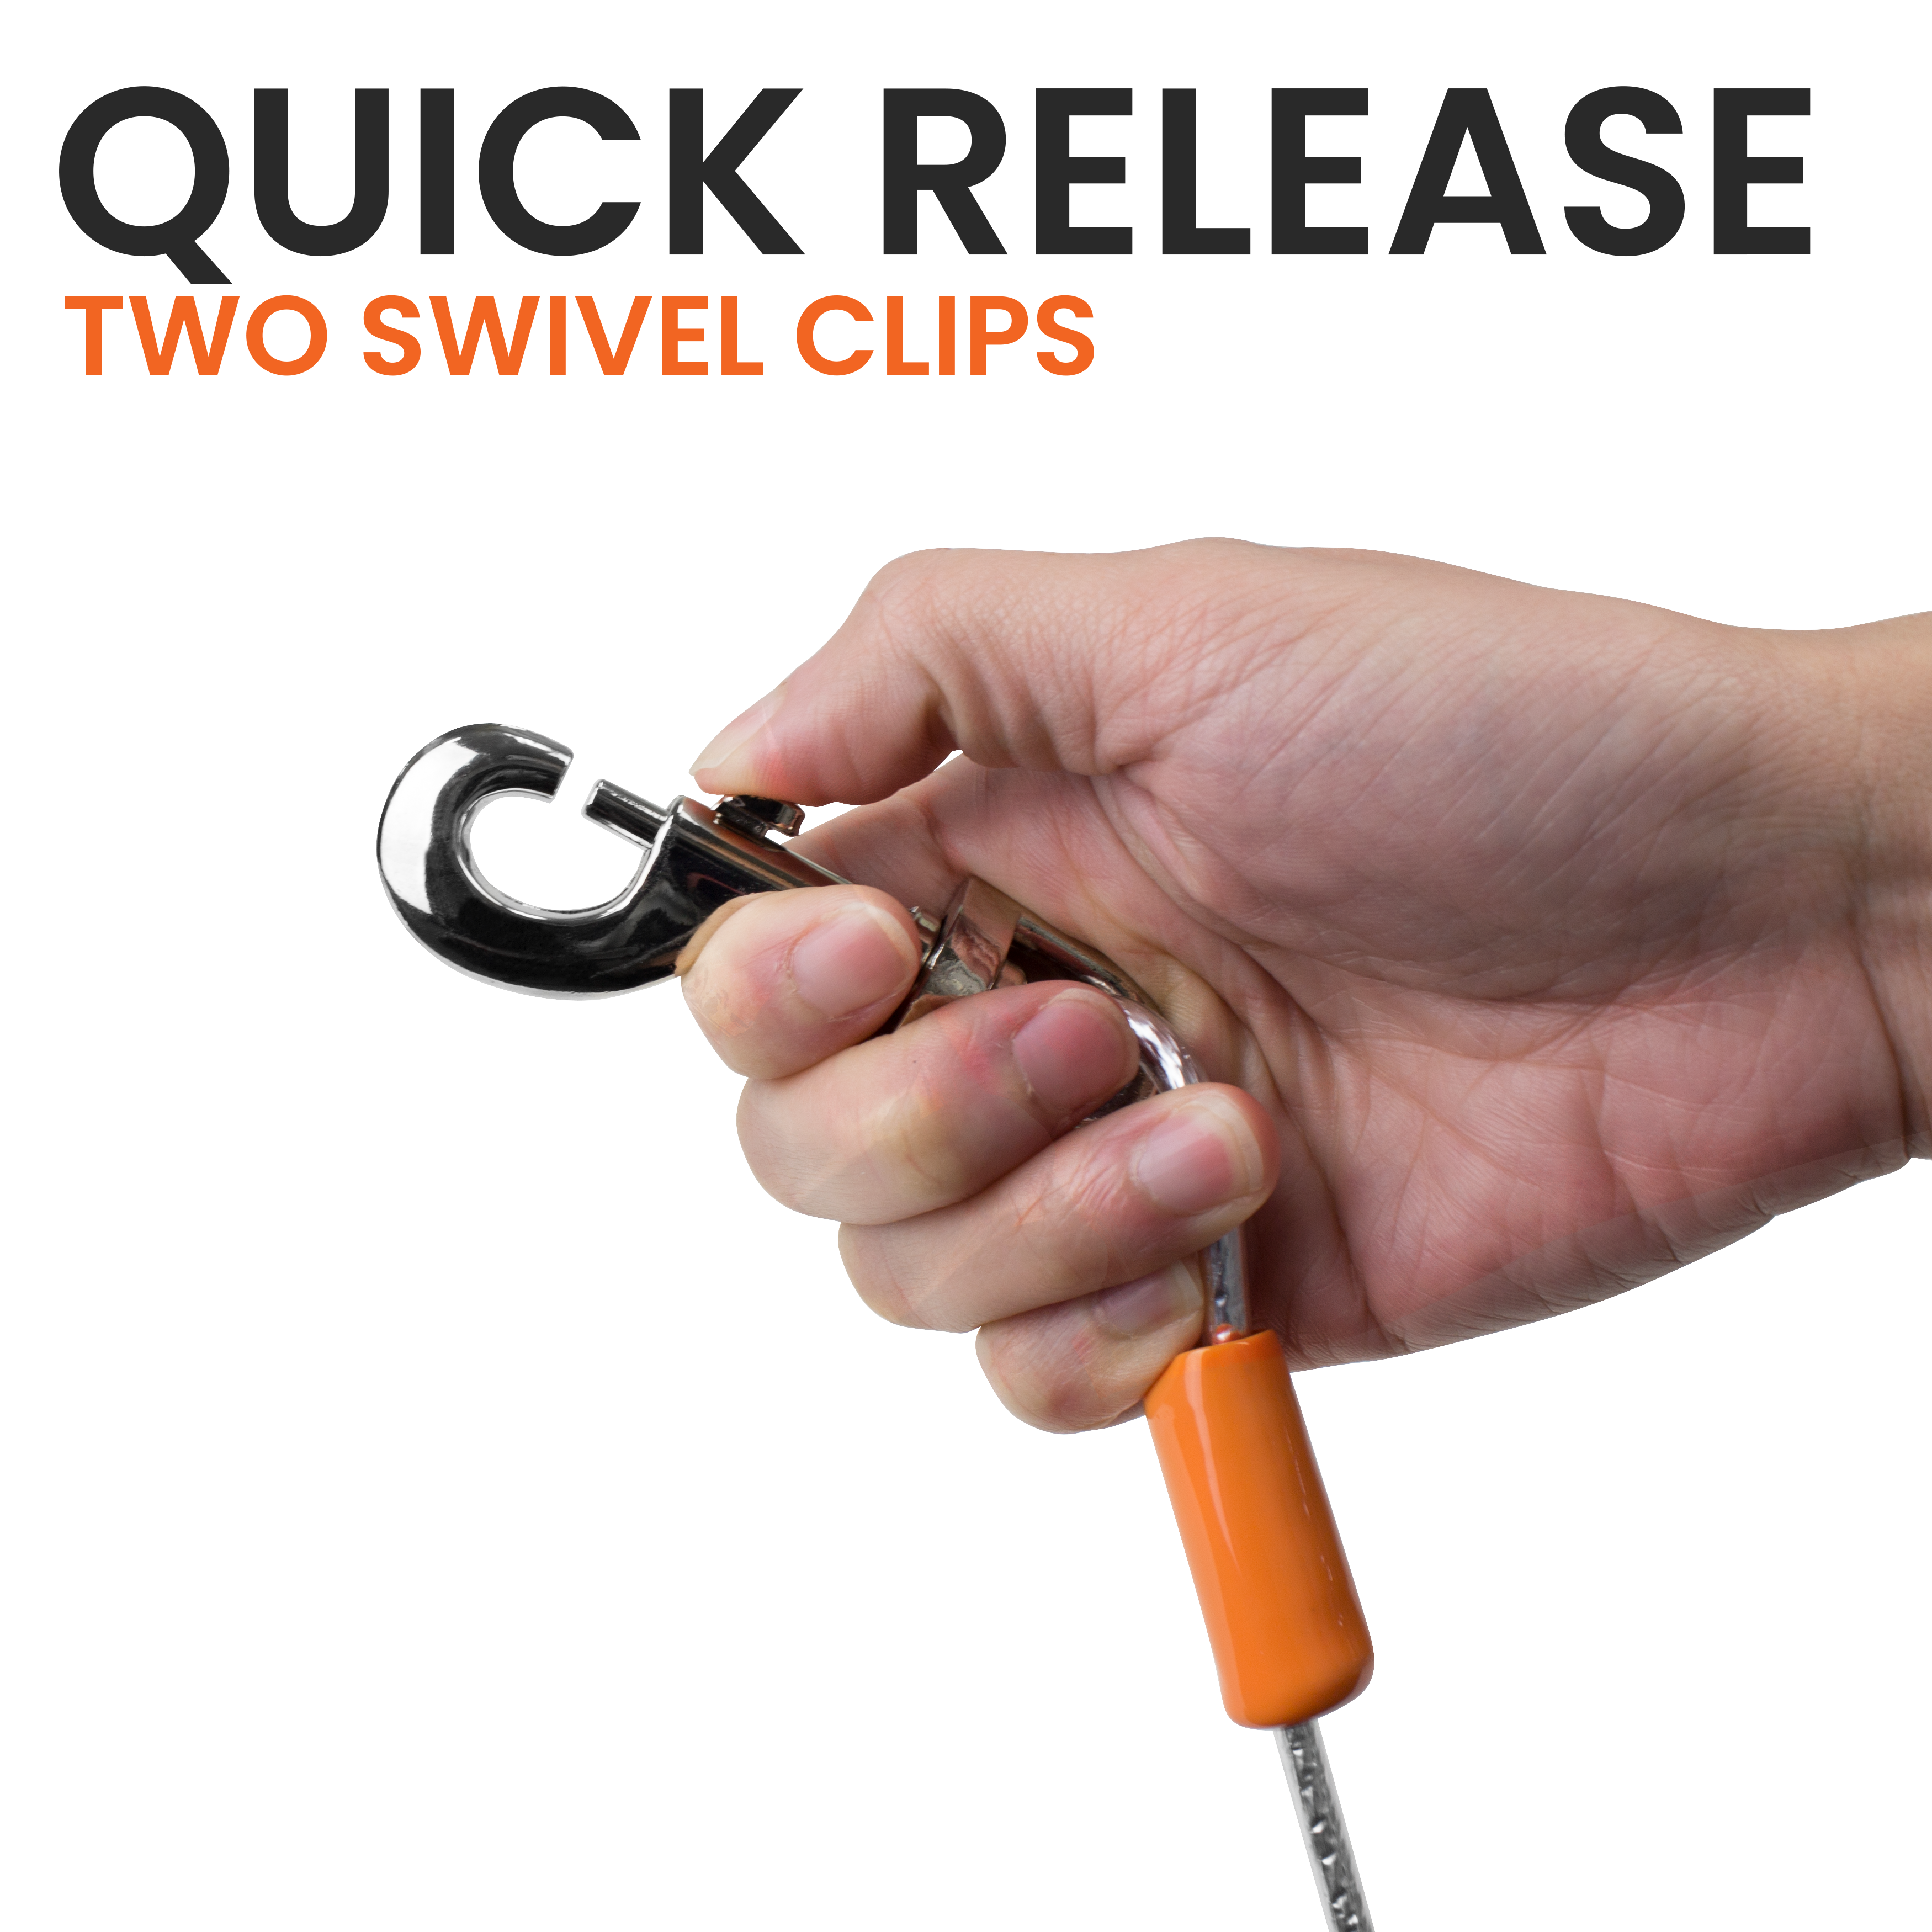 Quick Release Two Swivel Clips